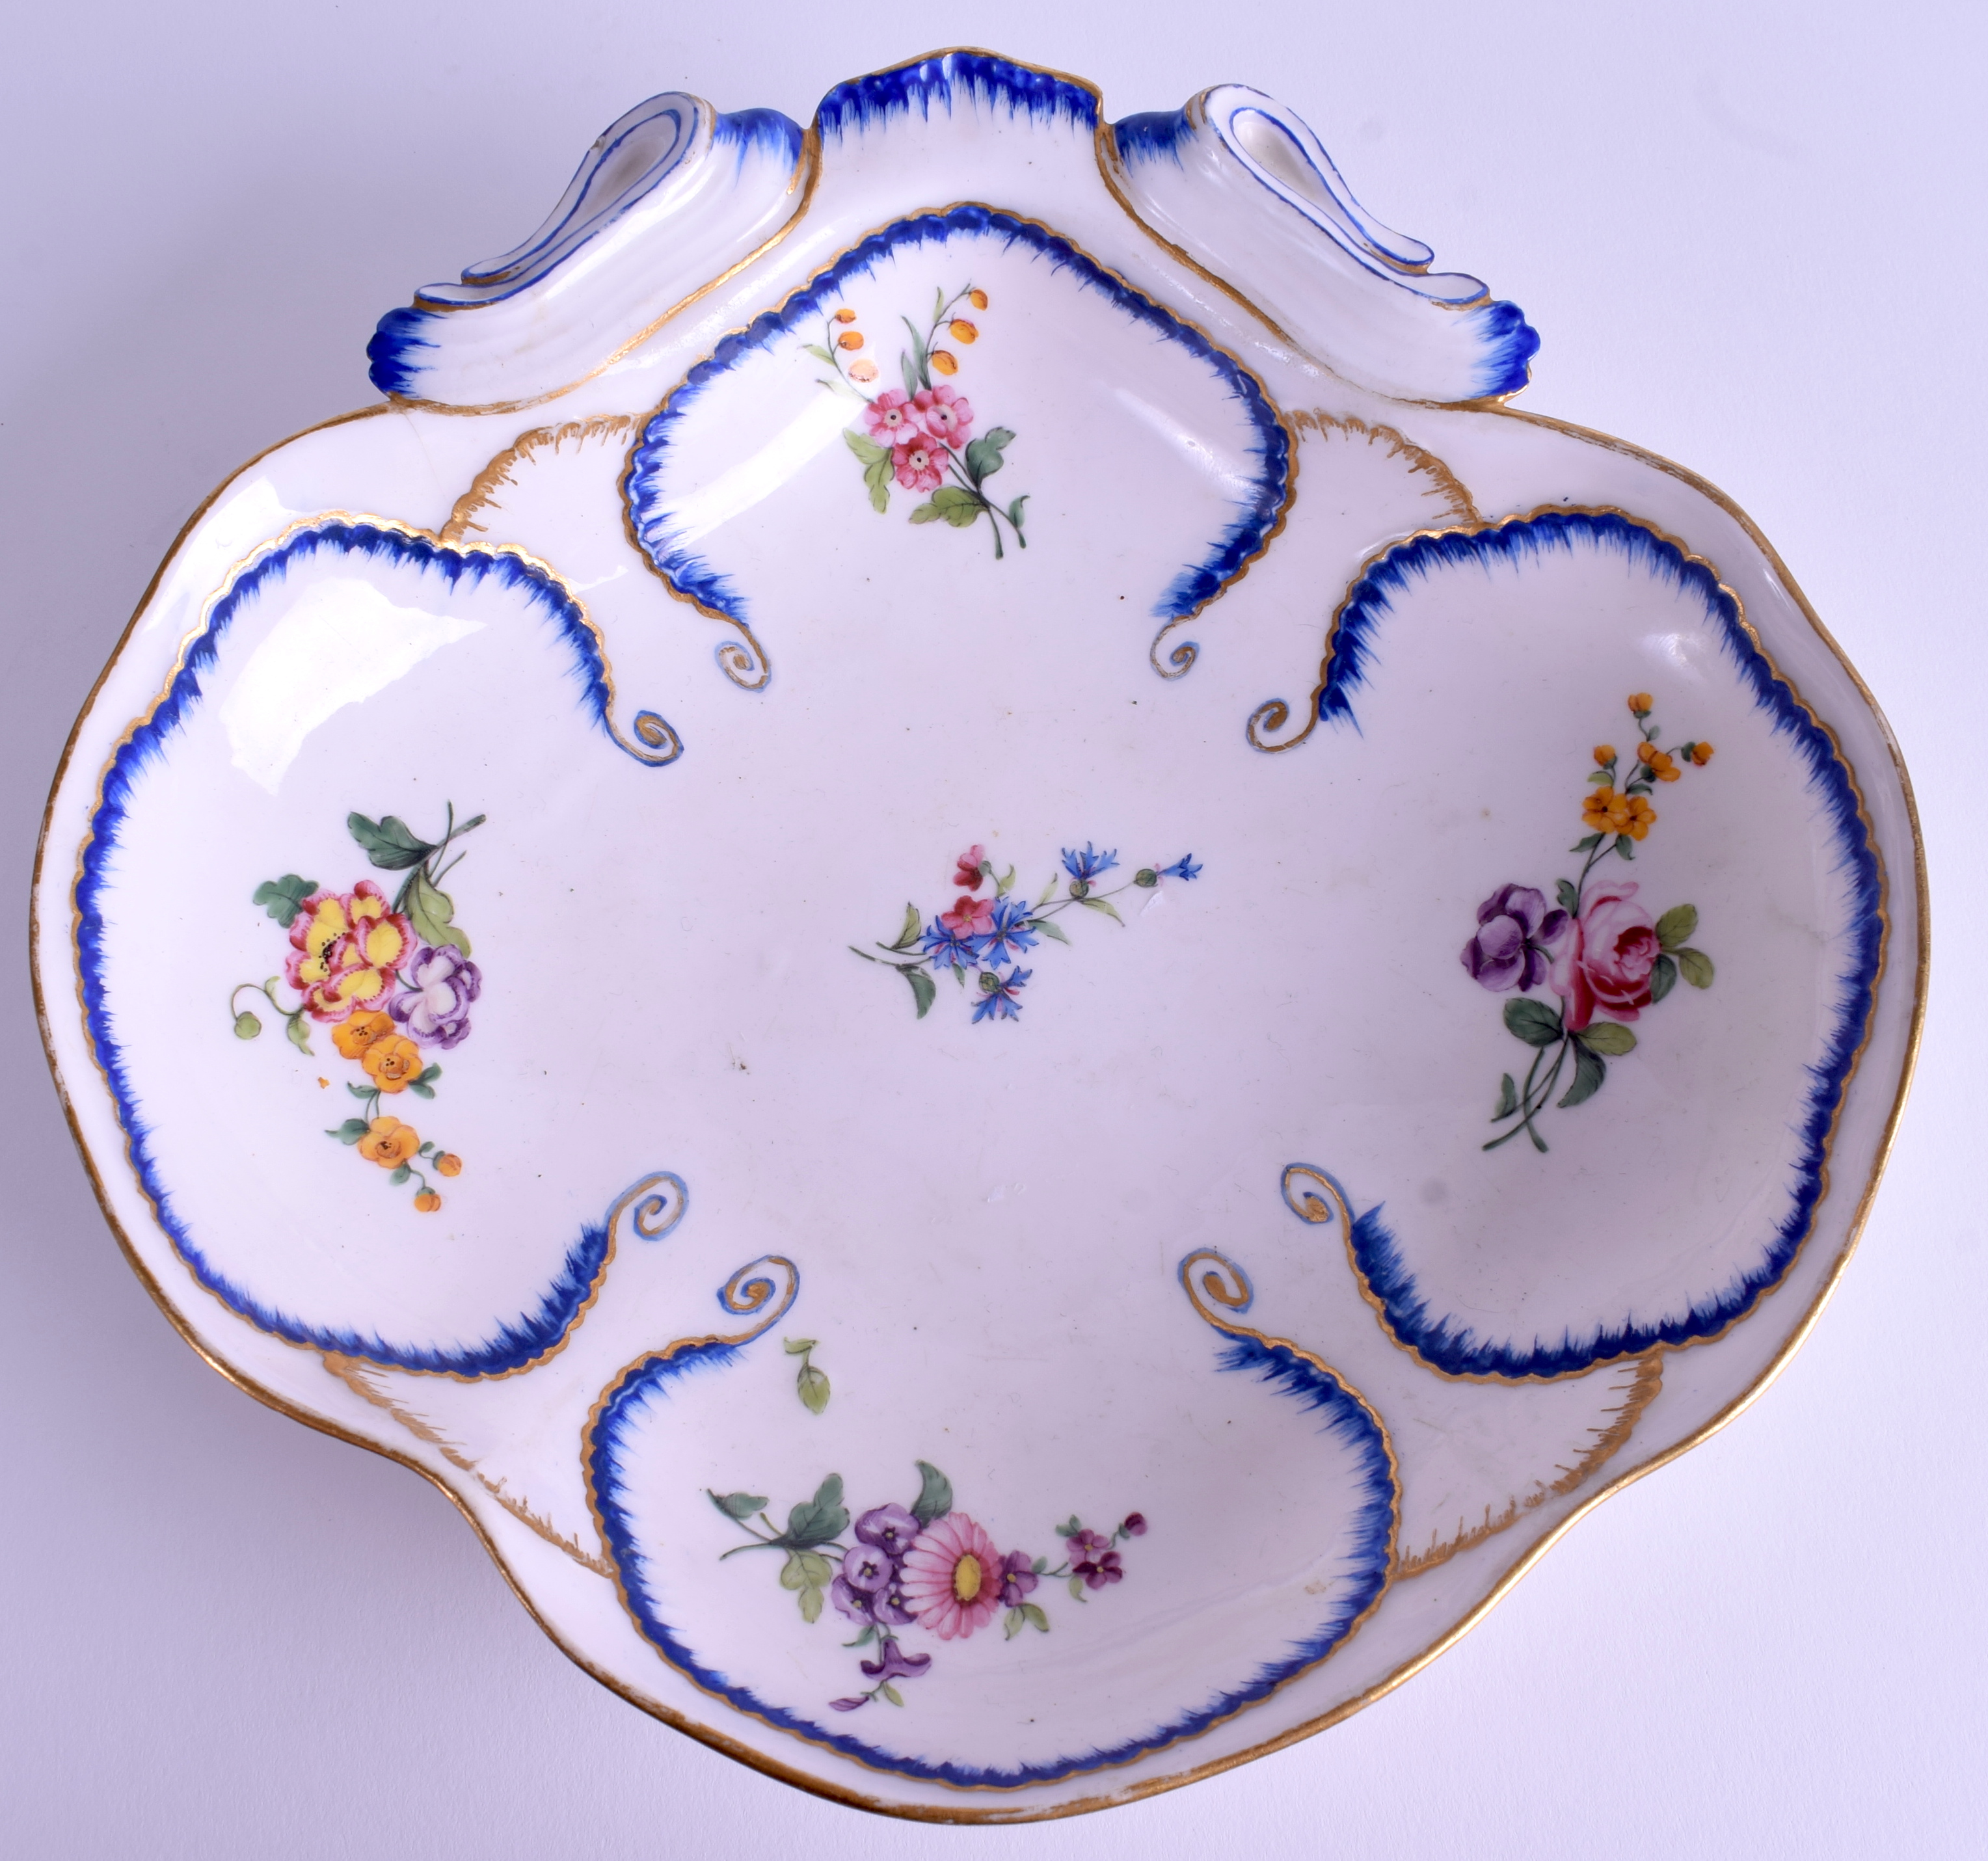 AN 18TH CENTURY SEVRES PORCELAIN SCALLOPED DISH painted with foliage. 22 cm wide.